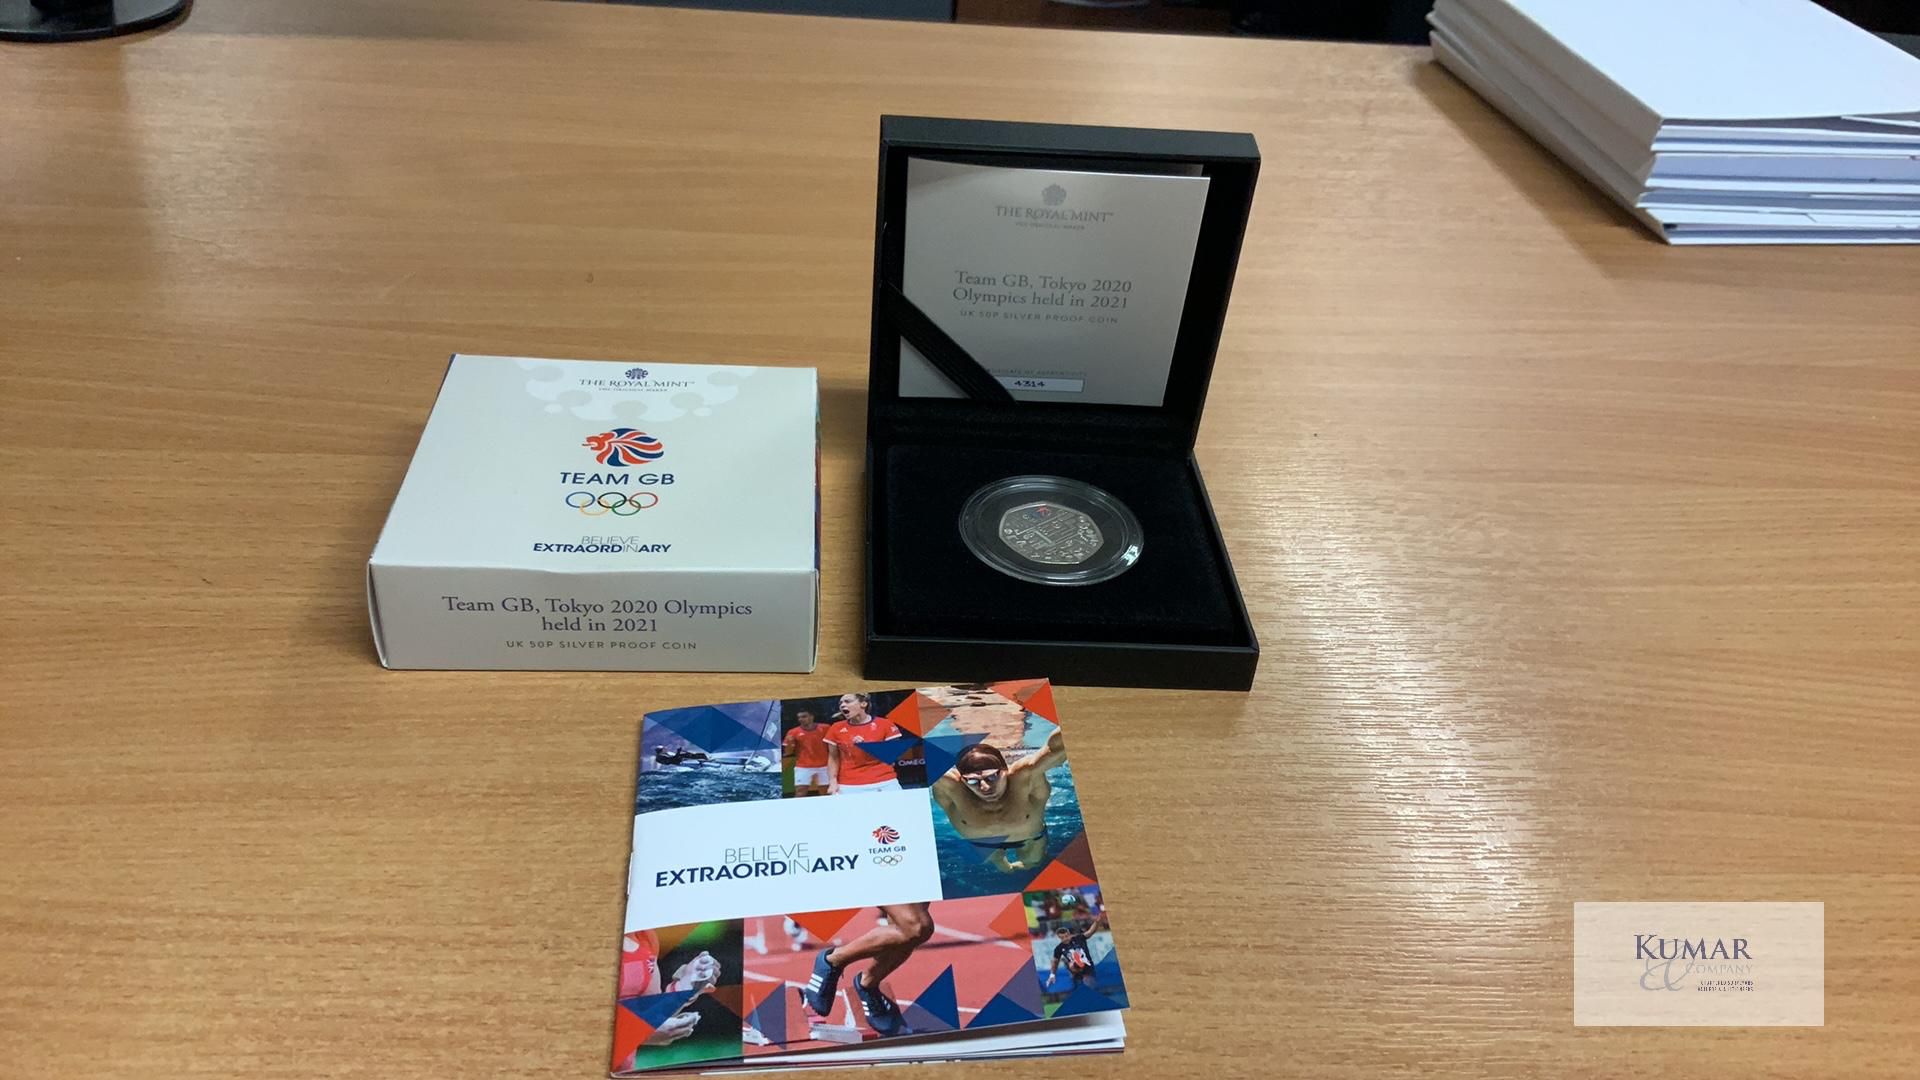 The Royal Mint Coin- Team GB Tokyo 2020 Olympics Held in 2021 2021 UK 50p Silver Proof Coin - Image 2 of 4